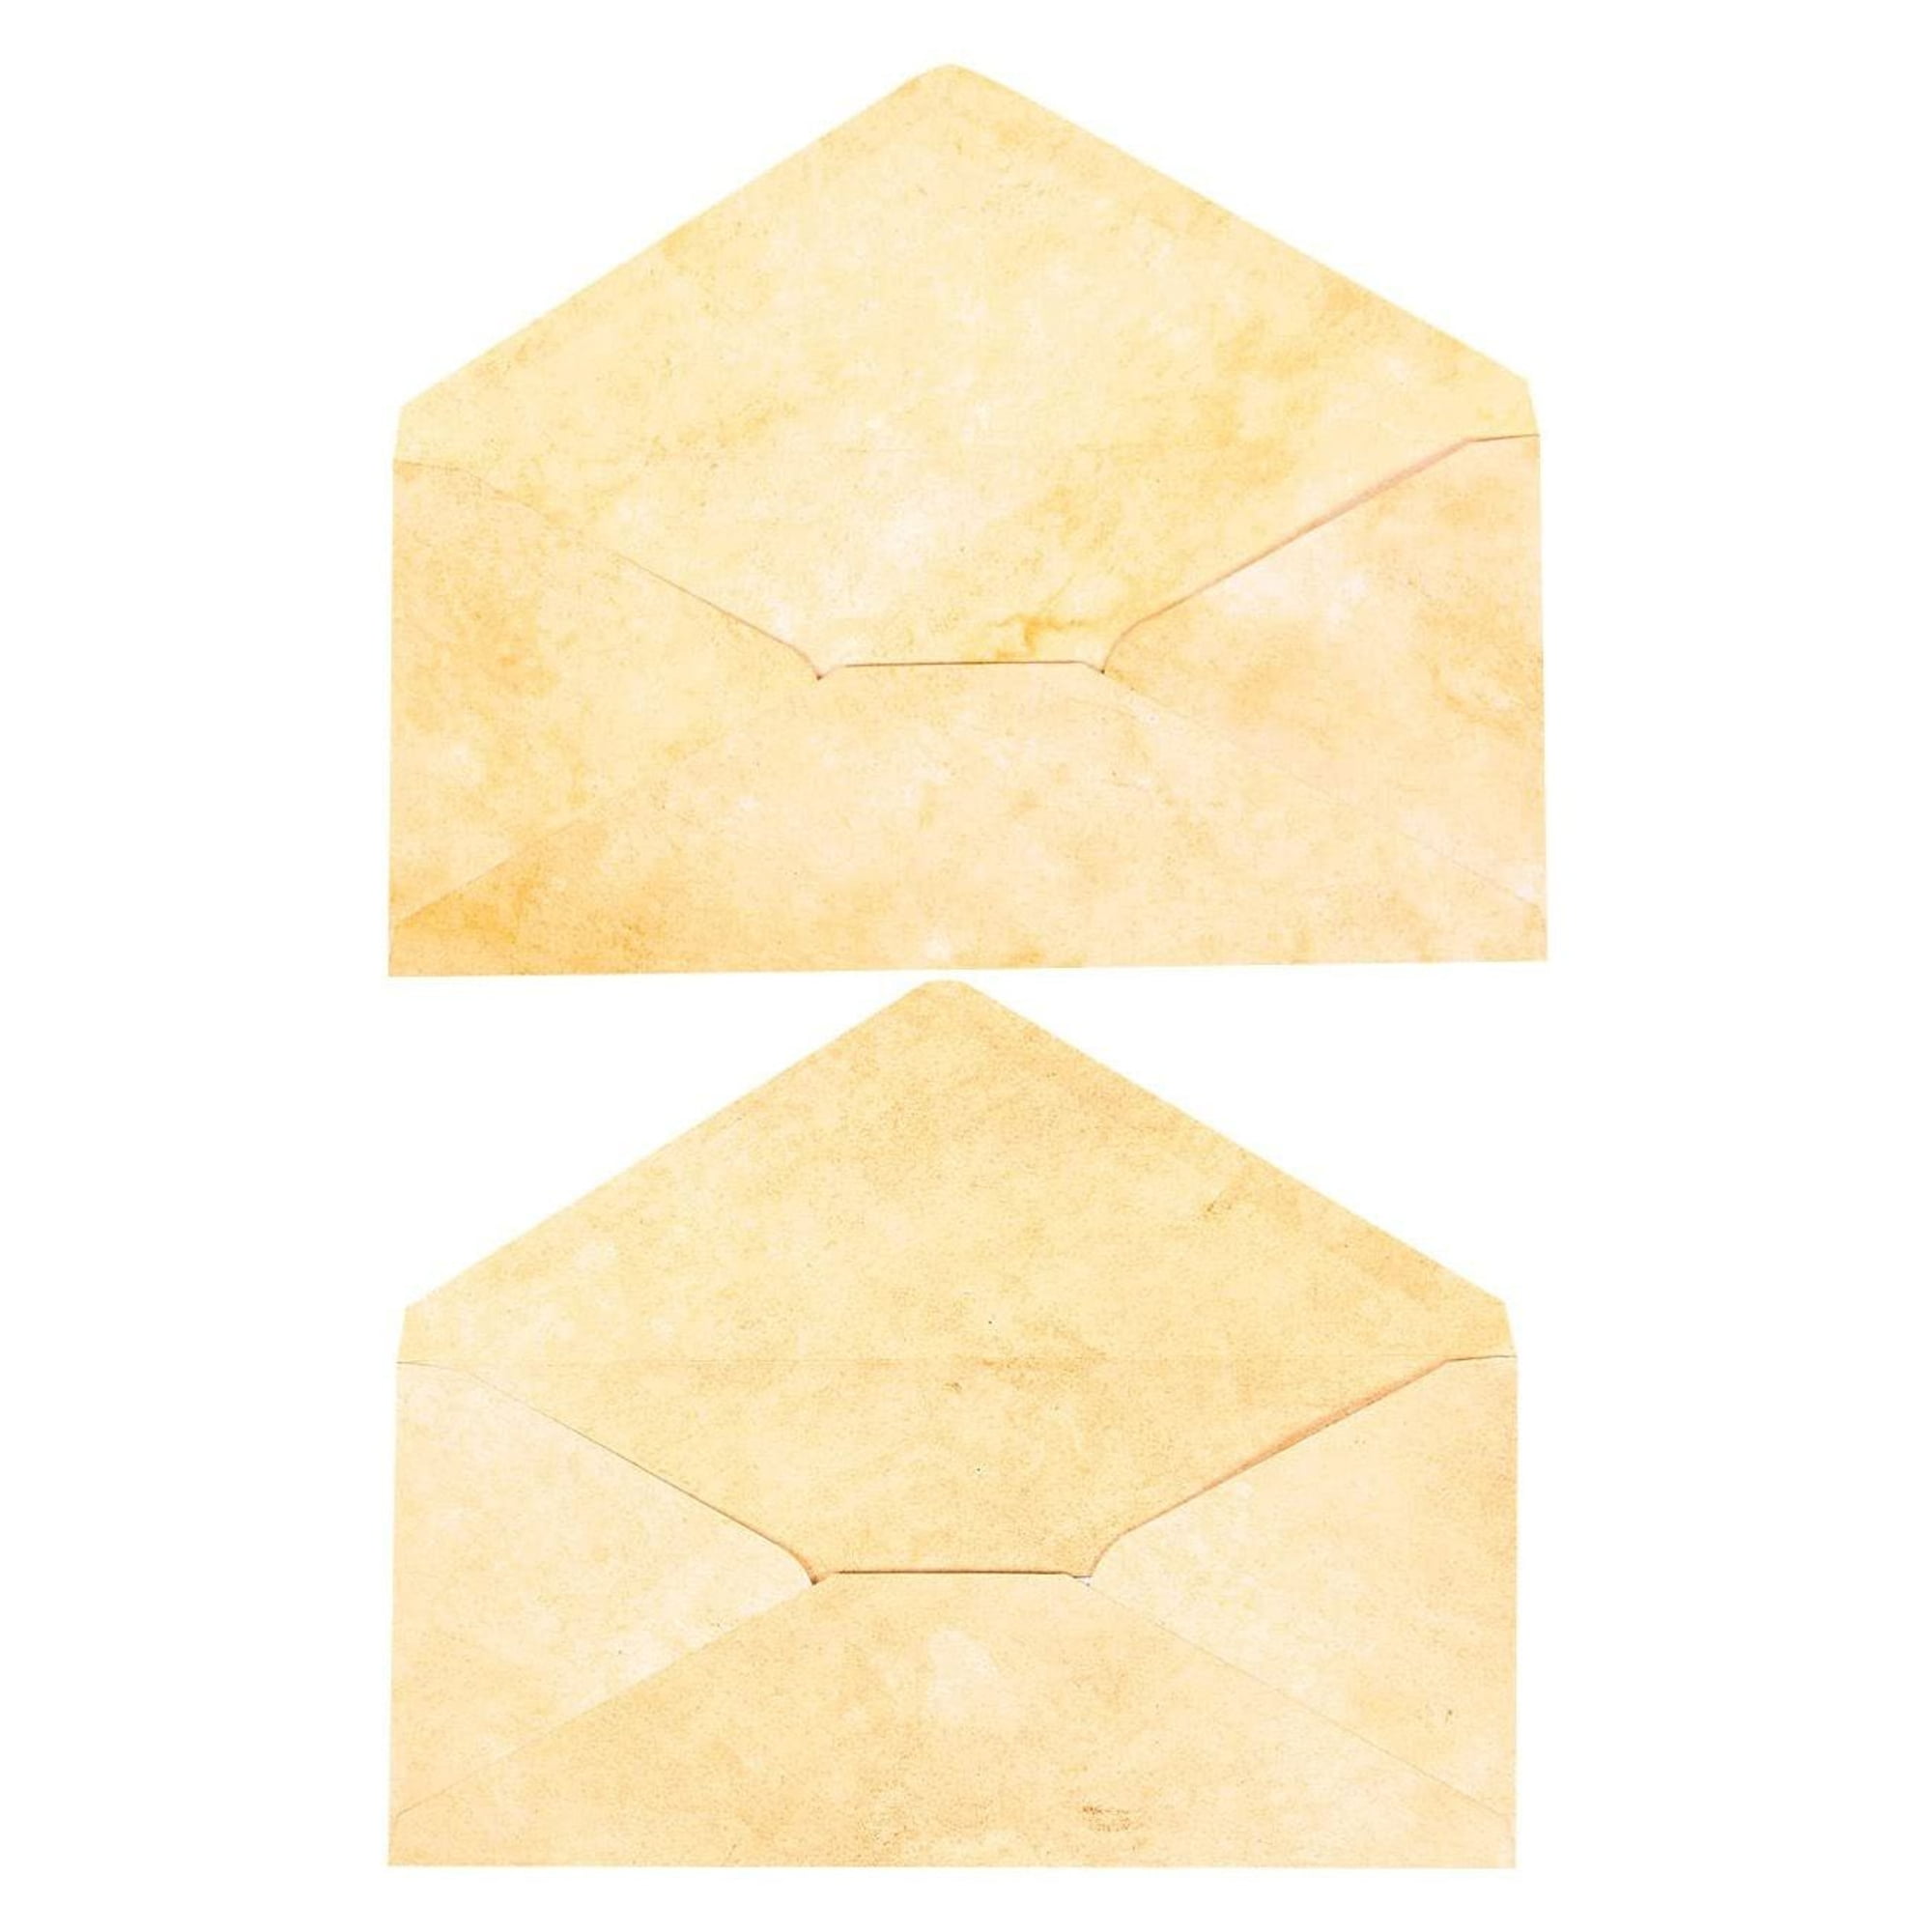 48-Pack Old Fashioned Vintage Envelopes for Writing Letters with 6